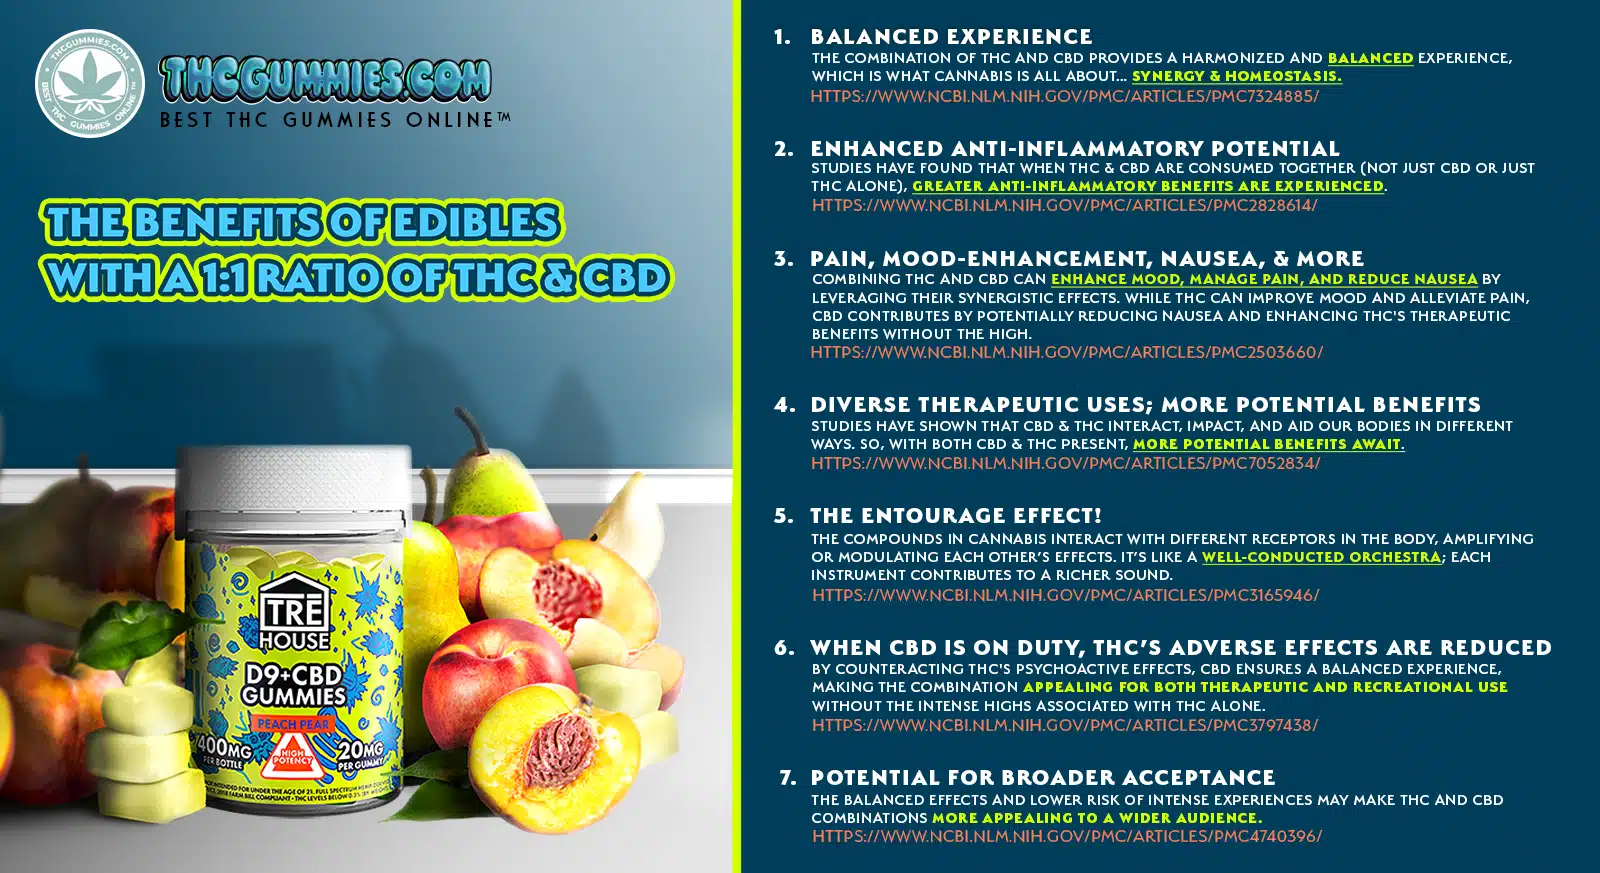 An infographic titled 'The Benefits of THC gummies with 1:1 ratios of CBD and THC' it has a photo of TRE HOUSE PEACH PEAR gummies and it offers the following seven key points which are cited for verification, '1. BALANCED EXPERIENCE THE COMBINATION OF THC AND CD PROVIDES A HARMONIZED AND BALANCED EXPERIENCE, WHICH IS WHAT CANNABIS IS ALL ABOUT... SYNERGY & HOMEOSTASIS. HTTPS://WWW.NCBI.NLM.NIH.GOV/PMC/ARTICLES/PMC7324885/ 2. ENHANCED ANTI-INFLAMMATORY POTENTIAL STUDIES HAVE FOUND THAT WHEN THC & CD ARE CONSUMED TOGETHER (NOT JUST CD OR JUST THC ALONE), GREATER ANTI-INFLAMMATORY BENEFITS ARE EXPERIENCED. HTTPS://WWW.NCBI.NLM.NIH.GOV/PMC/ARTICLES/PMC2828614/ 3. PAIN, MOOD-ENHANCEMENT, NAUSEA, & MORE COMBINING THC AND CD CAN ENHANCE MOOD, MANAGE PAIN, AND REDUCE NAUSEA BY LEVERAGING THEIR SYNERGISTIC EFFECTS. WHILE THC CAN IMPROVE MOOD AND ALLEVIATE PAIN, CBD CONTRIBUTES BY POTENTIALLY REDUCING NAUSEA AND ENHANCING THC'S THERAPEUTIC BENEFITS WITHOUT THE HIGH. HTTPS://WWW.NCBI.NLM.NIH.GOV/PMC/ARTICLES/PMC2503660/ 4. DIVERSE THERAPEUTIC USES; MORE POTENTIAL BENEFITS STUDIES HAVE SHOWN THAT CBD & THC INTERACT, IMPACT, AND AID OUR BODIES IN DIFFERENT WAYS. SO, WITH BOTH CBD & THC PRESENT, MORE POTENTIAL BENEFITS AWAIT. HTTPS://WWW.NCBI.NLM.NIH.GOV/PMC/ARTICLES/PMC7052834/ 5. THE ENTOURAGE EFFECT! THE COMPOUNDS IN CANNABIS INTERACT WITH DIFFERENT RECEPTORS IN THE BODY, AMPLIFYING OR MODULATING EACH OTHER'S EFFECTS. IT'S LIKE A WELL-CONDUCTED ORCHESTRA; EACH INSTRUMENT CONTRIBUTES TO A RICHER SOUND. HTTPS://WWW.NCBI.NLM.NIH.GOV/PMC/ARTICLES/PMC3165946/ 6. WHEN CBD IS ON DUTY, THC'S ADVERSE EFFECTS ARE REDUCED BY COUNTERACTING TH'S PSYCHOACTIVE EFFECTS, CBD ENSURES A BALANCED EXPERIENCE, MAKING THE COMBINATION APPEALING FOR BOTH THERAPEUTIC AND RECREATIONAL USE WITHOUT THE INTENSE HIGHS ASSOCIATED WITH THC ALONE. HTTPS://WWW.NCBI.NLM.NIH.GOV/PMC/ARTICLES/PMC3797438/ 7. POTENTIAL FOR BROADER ACCEPTANCE THE BALANCED EFFECTS AND LOWER RISK OF INTENSE EXPERIENCES MAY MAKE THC AND CBD COMBINATIONS MORE APPEALING TO A WIDER AUDIENCE. HTTPS://WWW.NCBI.NLM.NIH.GOV/PMC/ARTICLES/PMC4740396/ '.